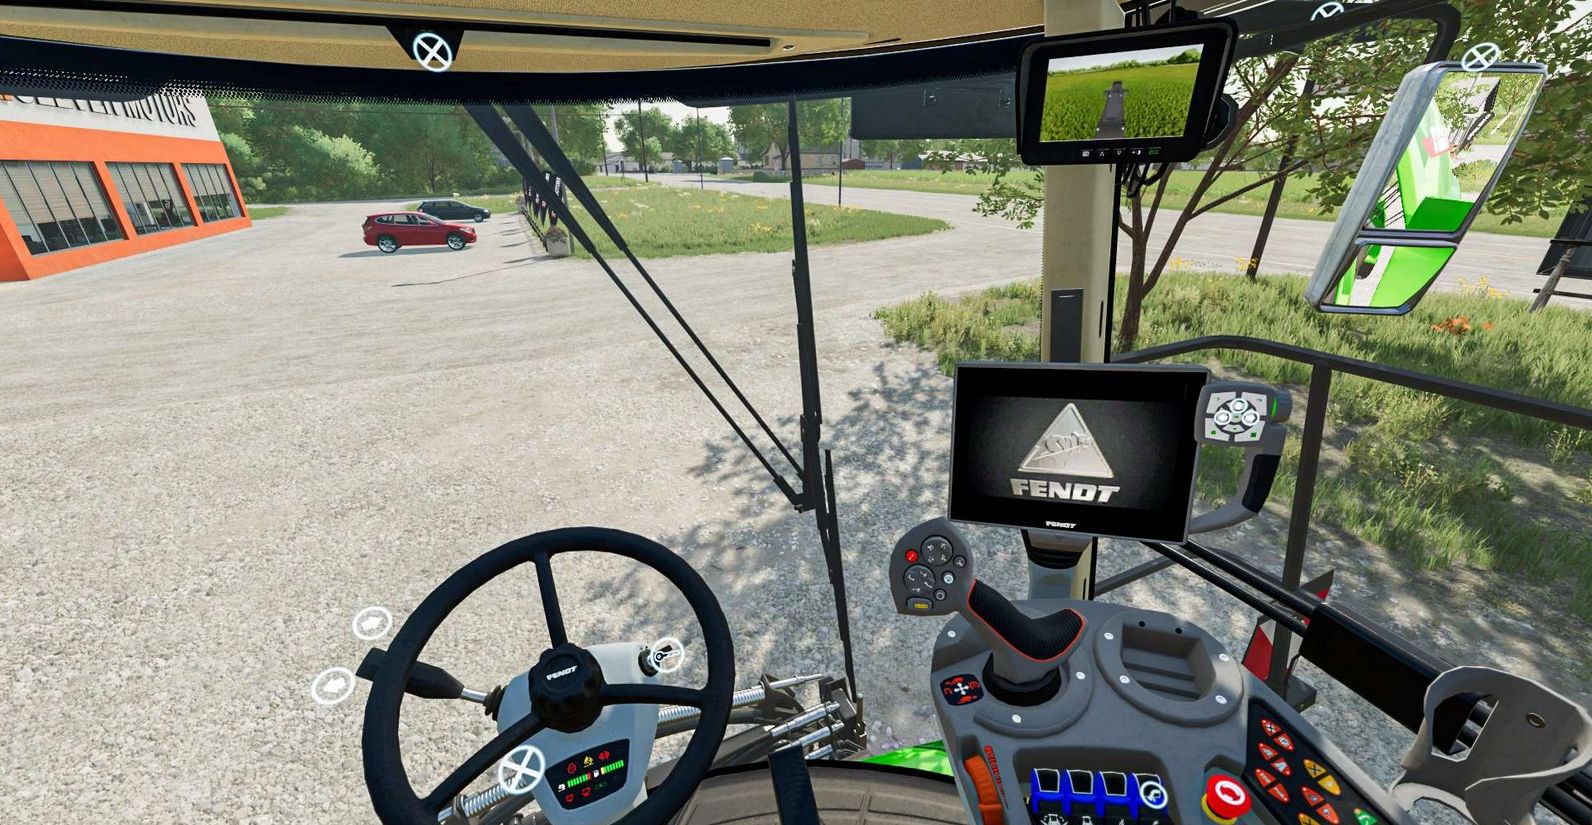 has anyone made a camera car like this for fs22? i found one for